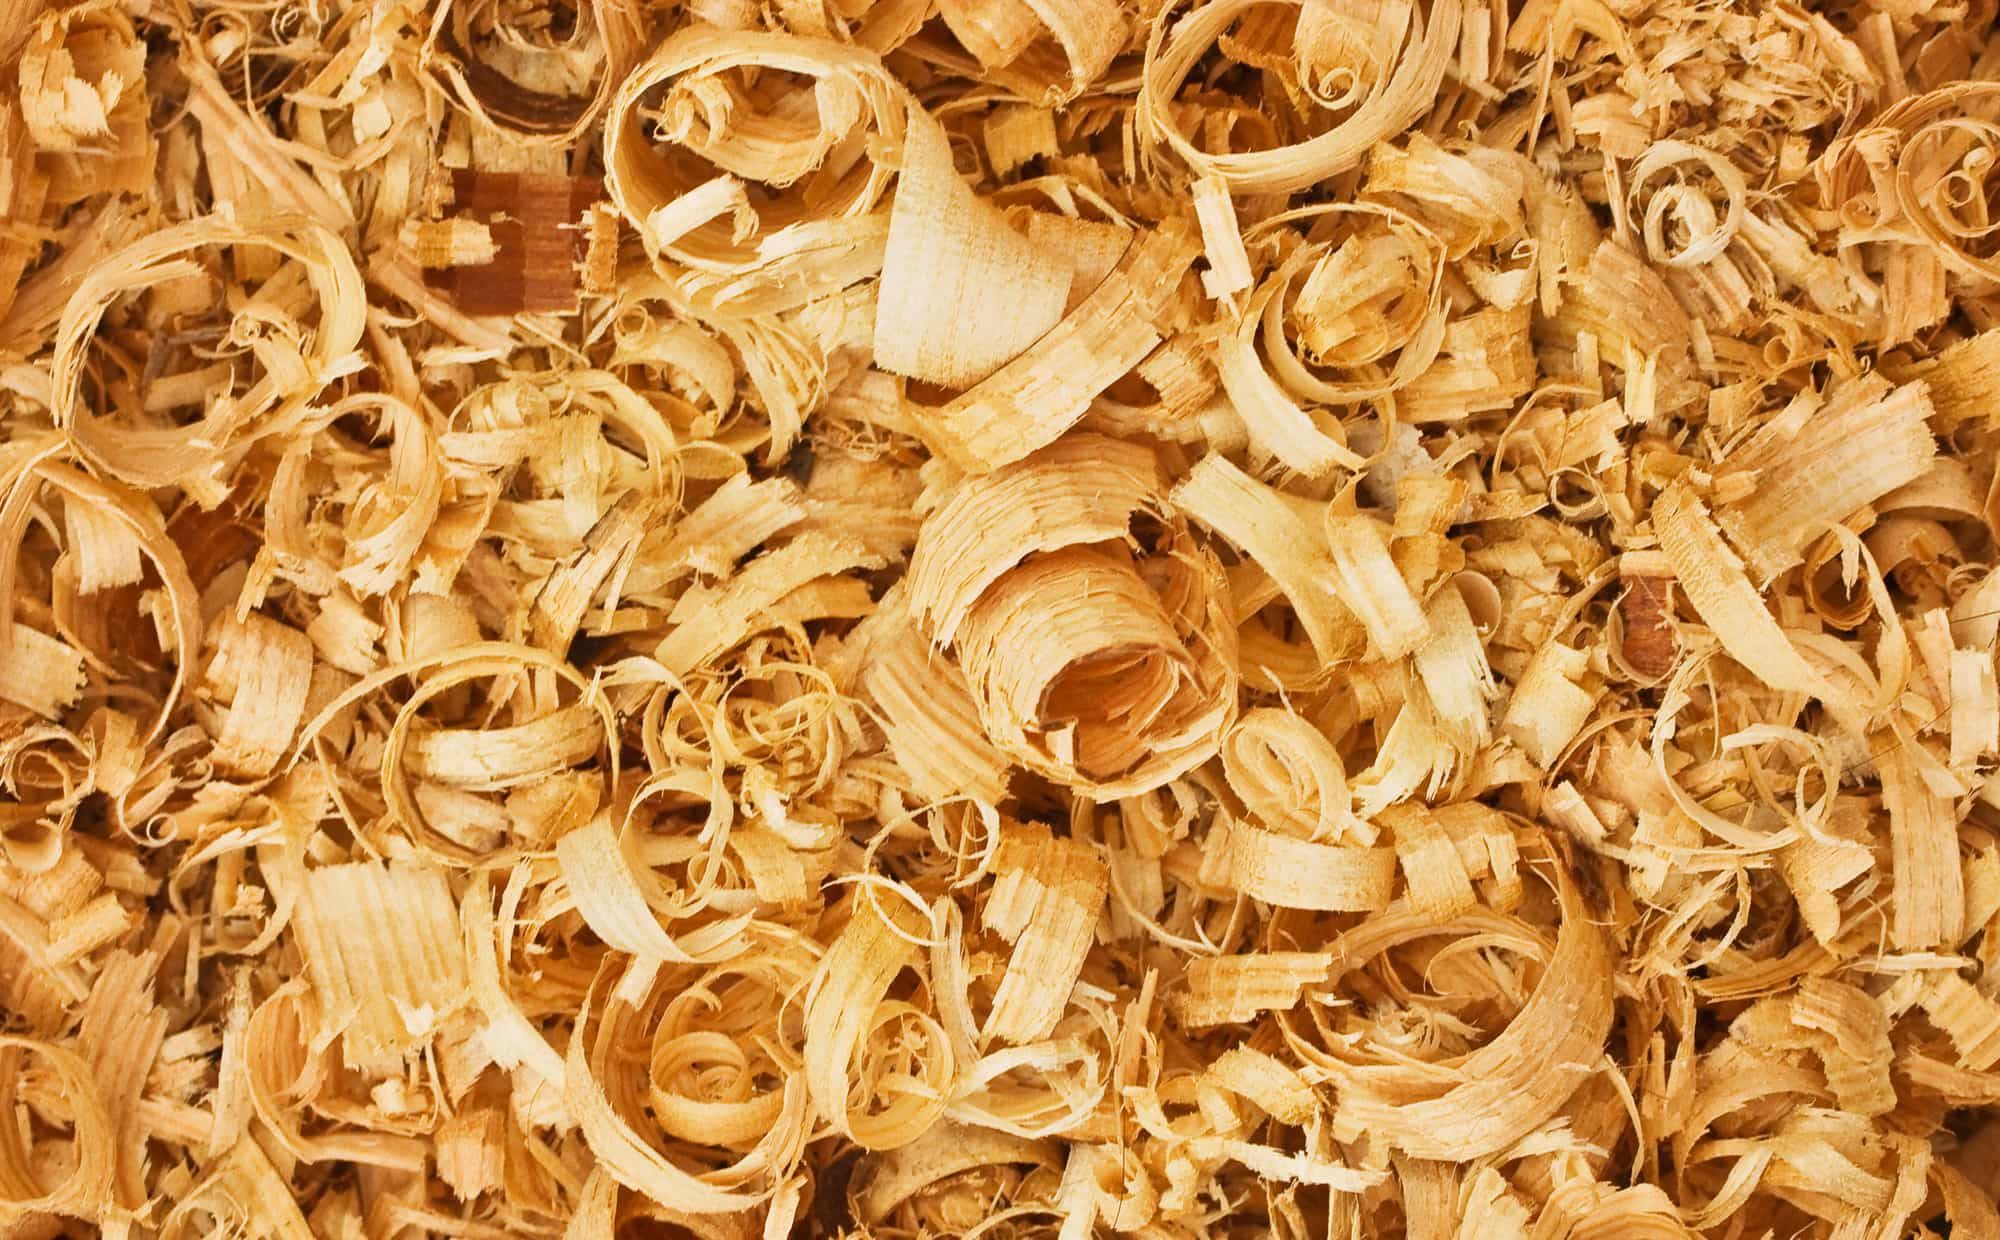 background of the golden curls of wood shavings